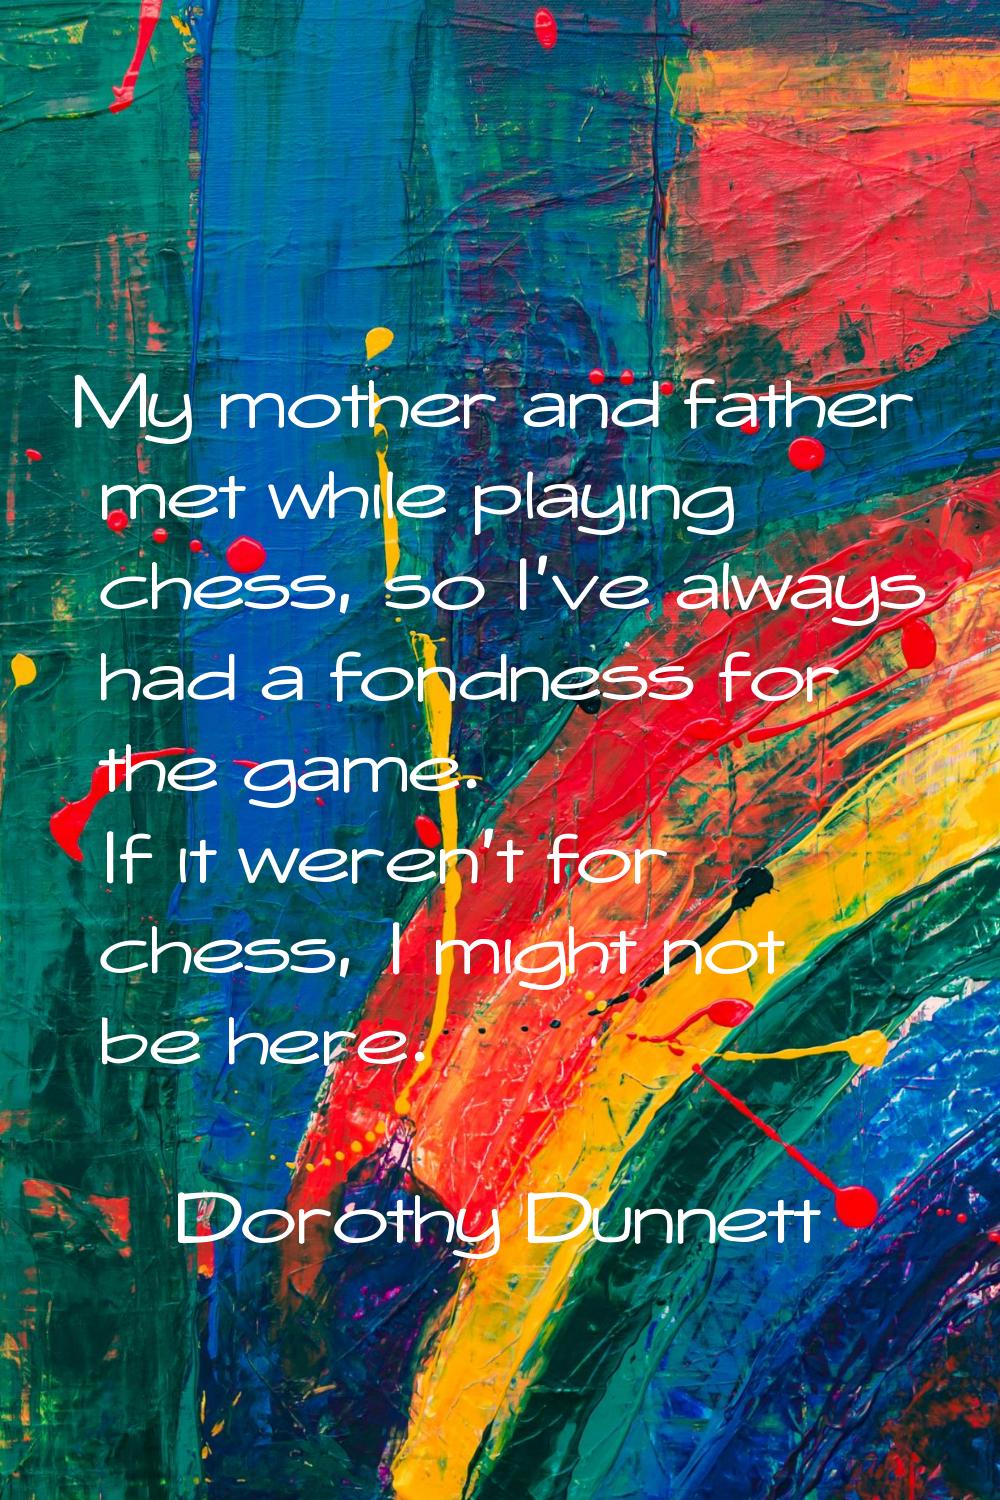 My mother and father met while playing chess, so I've always had a fondness for the game. If it wer